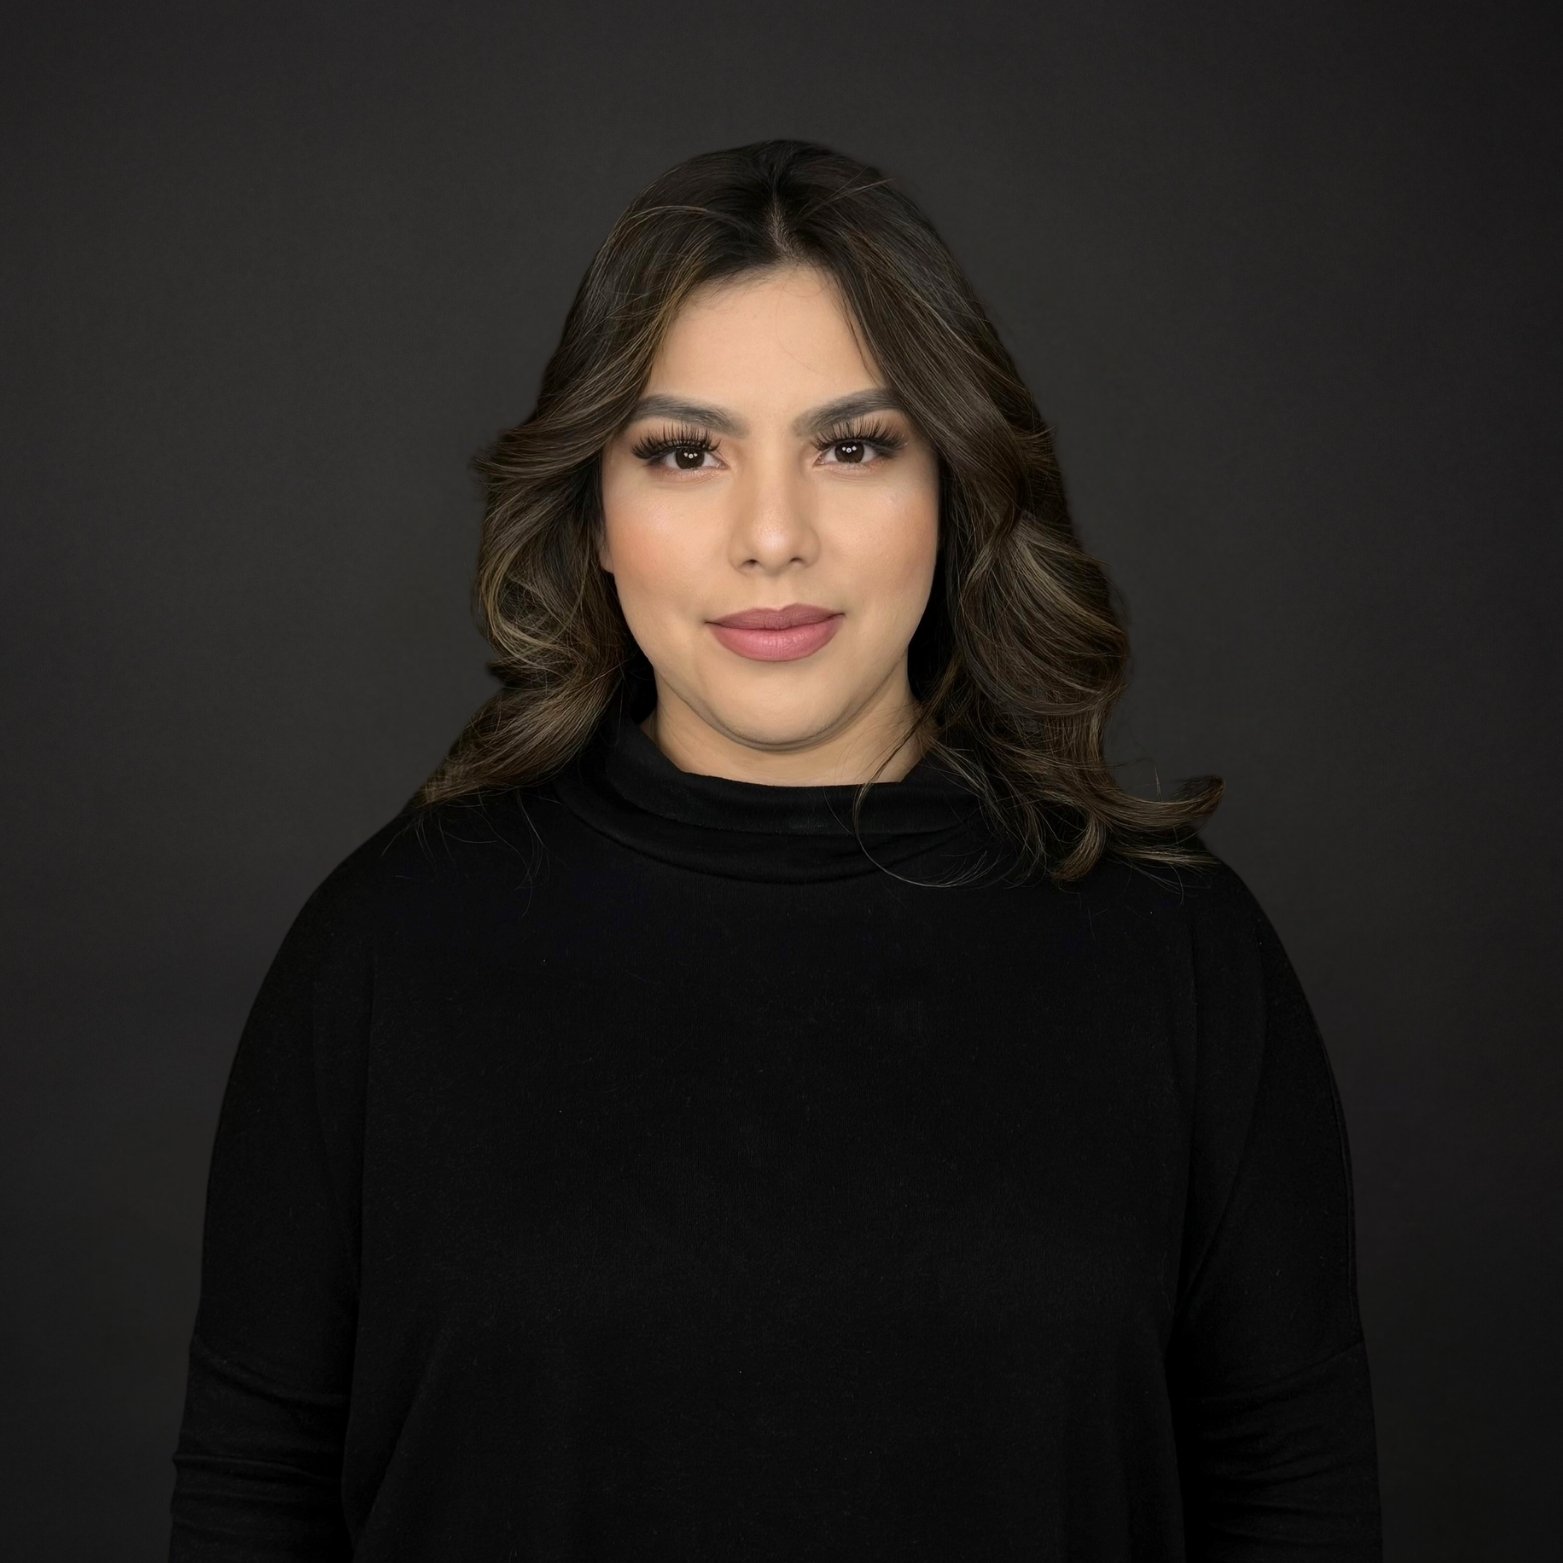 Nathalia Gonzalez has eight years of experience managing cases, which has honed her organization, communication, and customer service skills to a science.